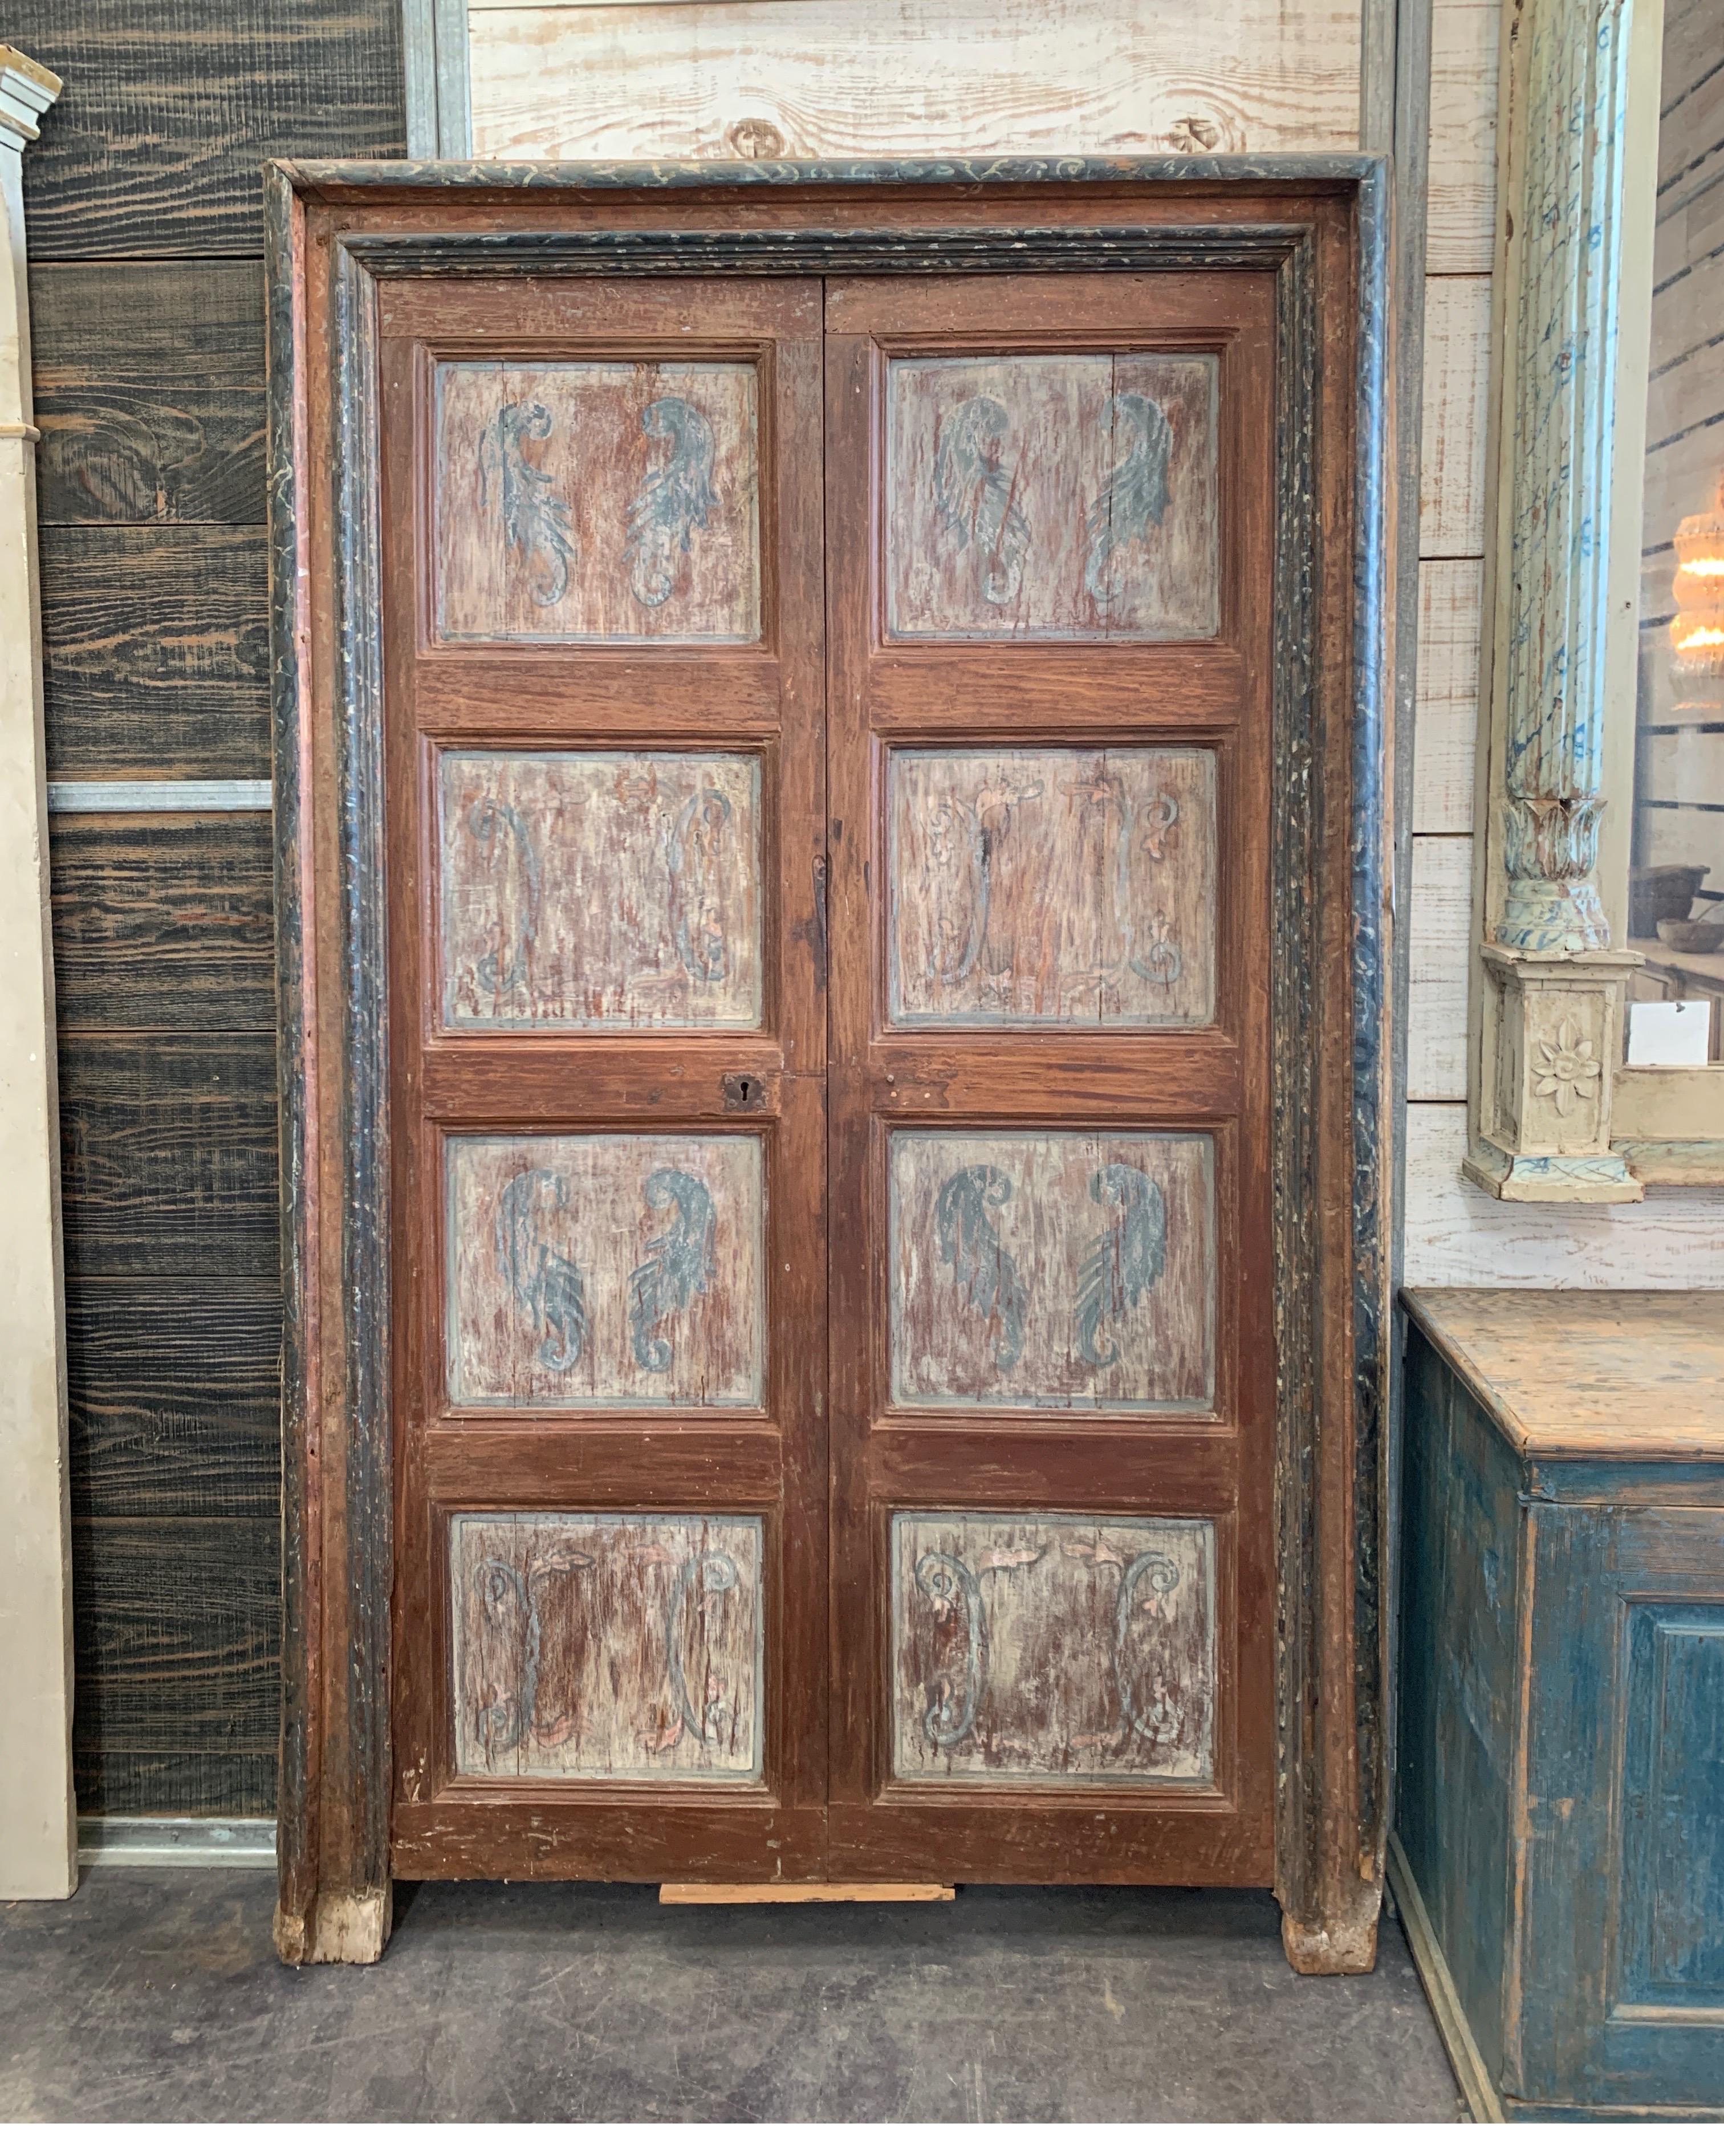 These early Spanish door are full of character and charm with the original iron hardware on back and front. Just the handle is missing. The surround has gorgeous colors of blue and black marble effect. The door measures 44 W x 84.5 T without the